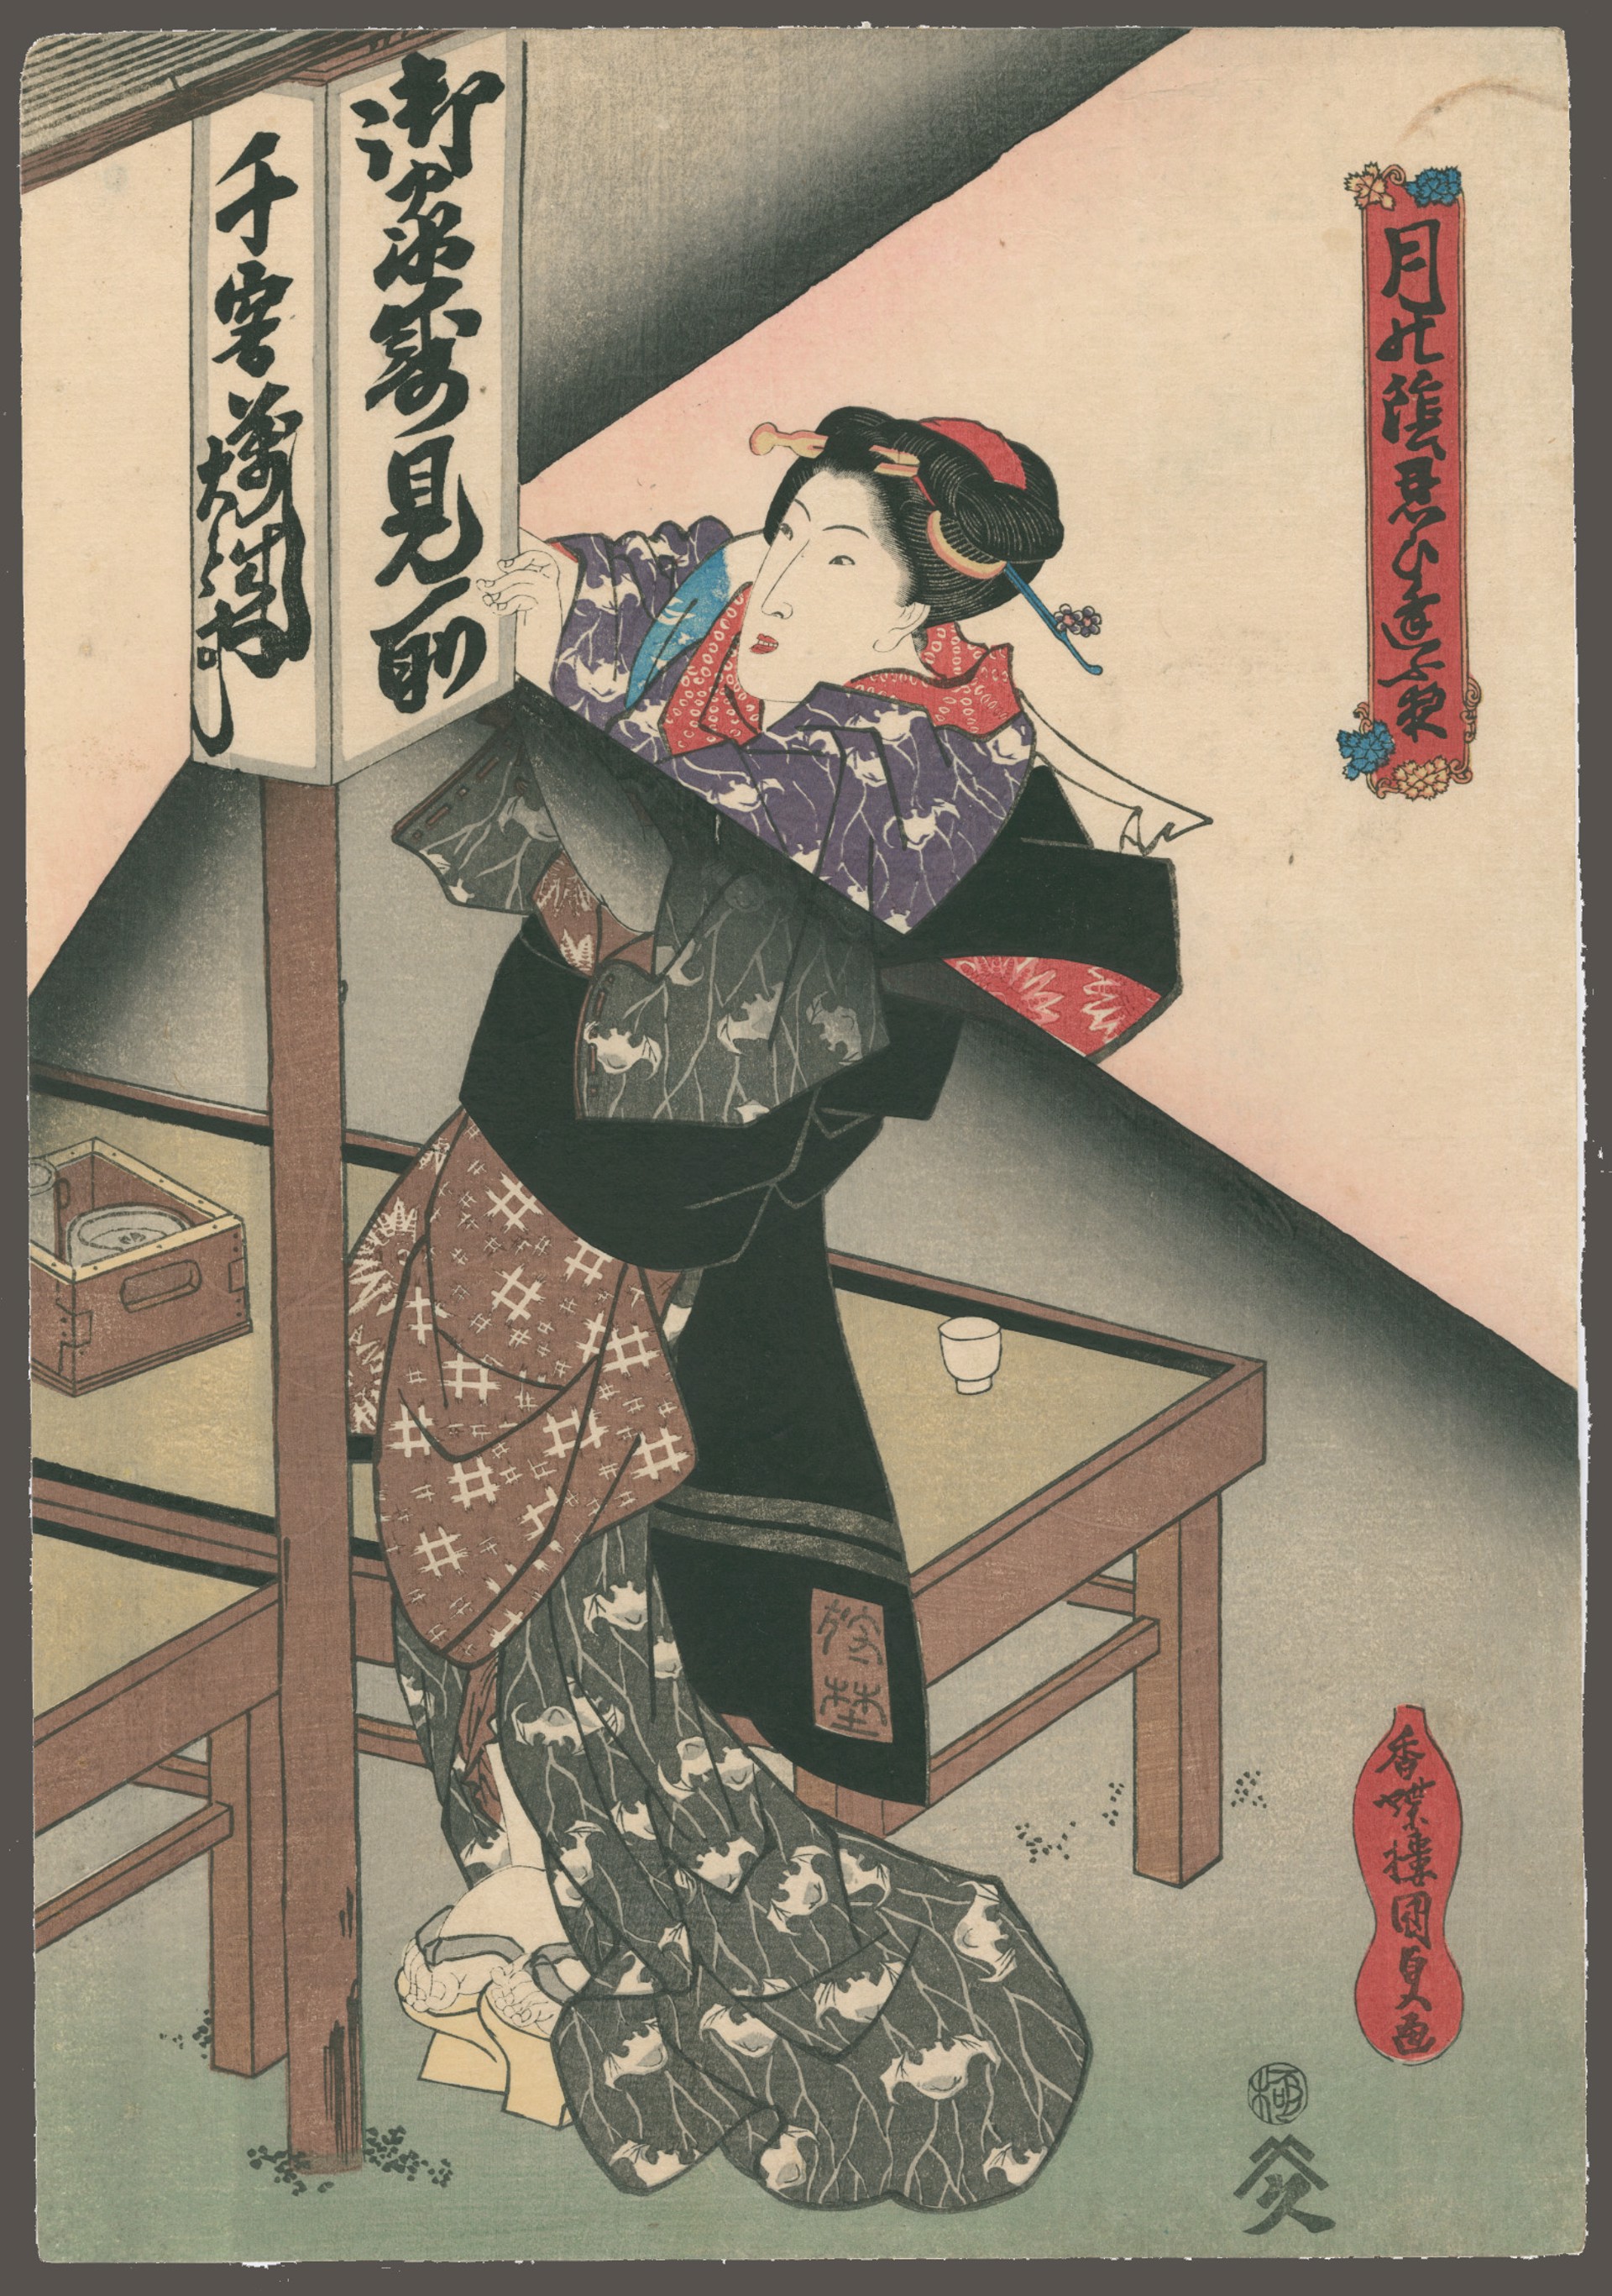 A Beauty Lighting a Candle in an Andon (Lantern) Secret Meetings by Moonlight by Kunisada